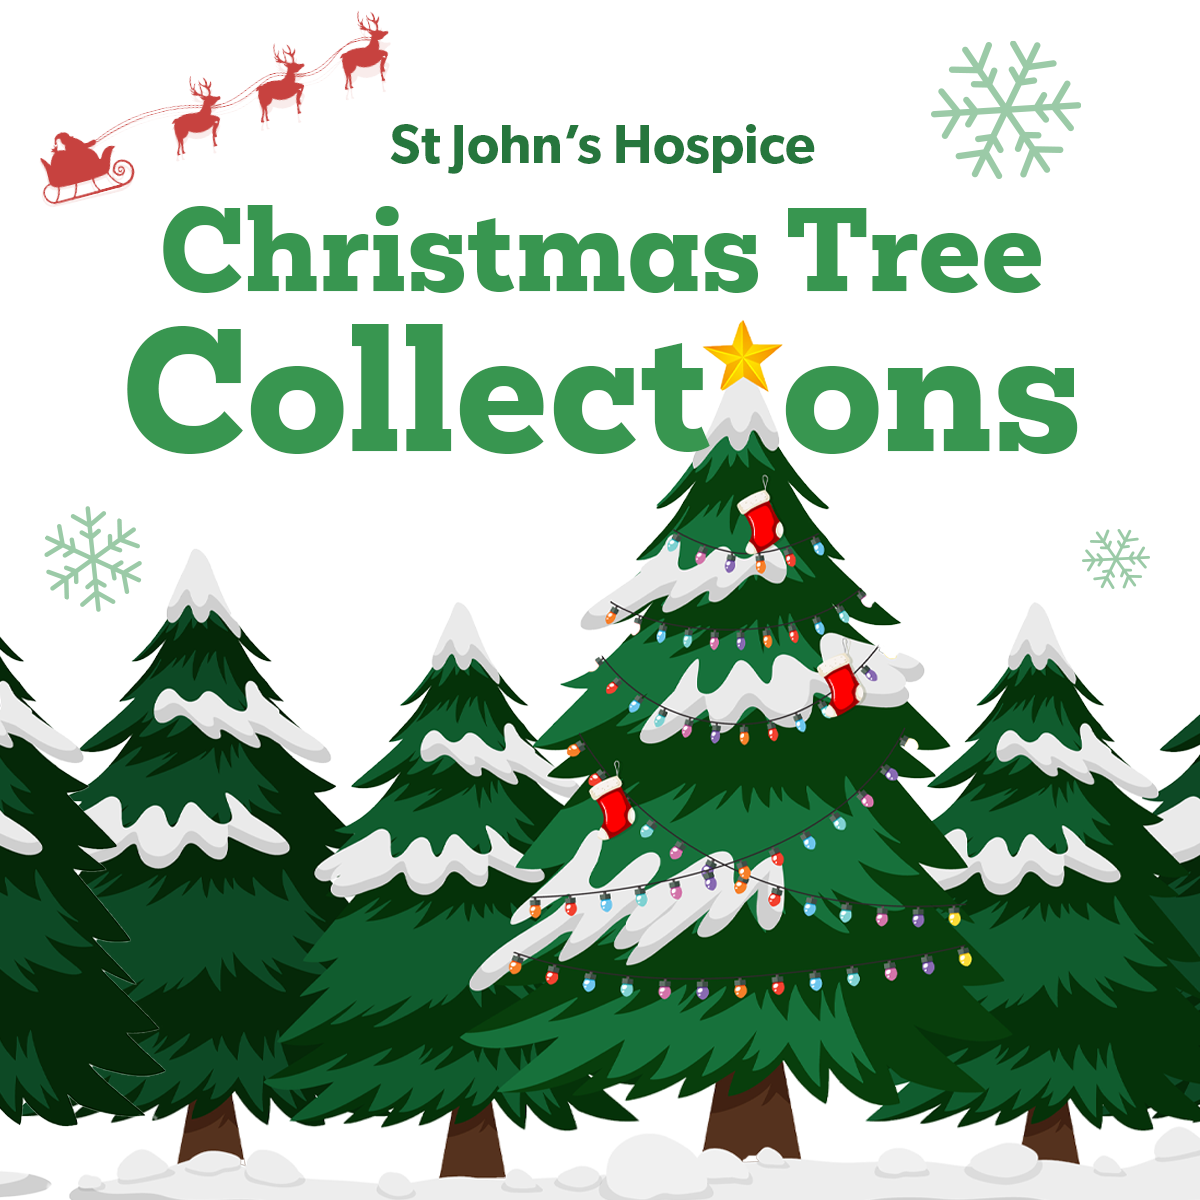 St John's Hospice Christmas Tree Collections